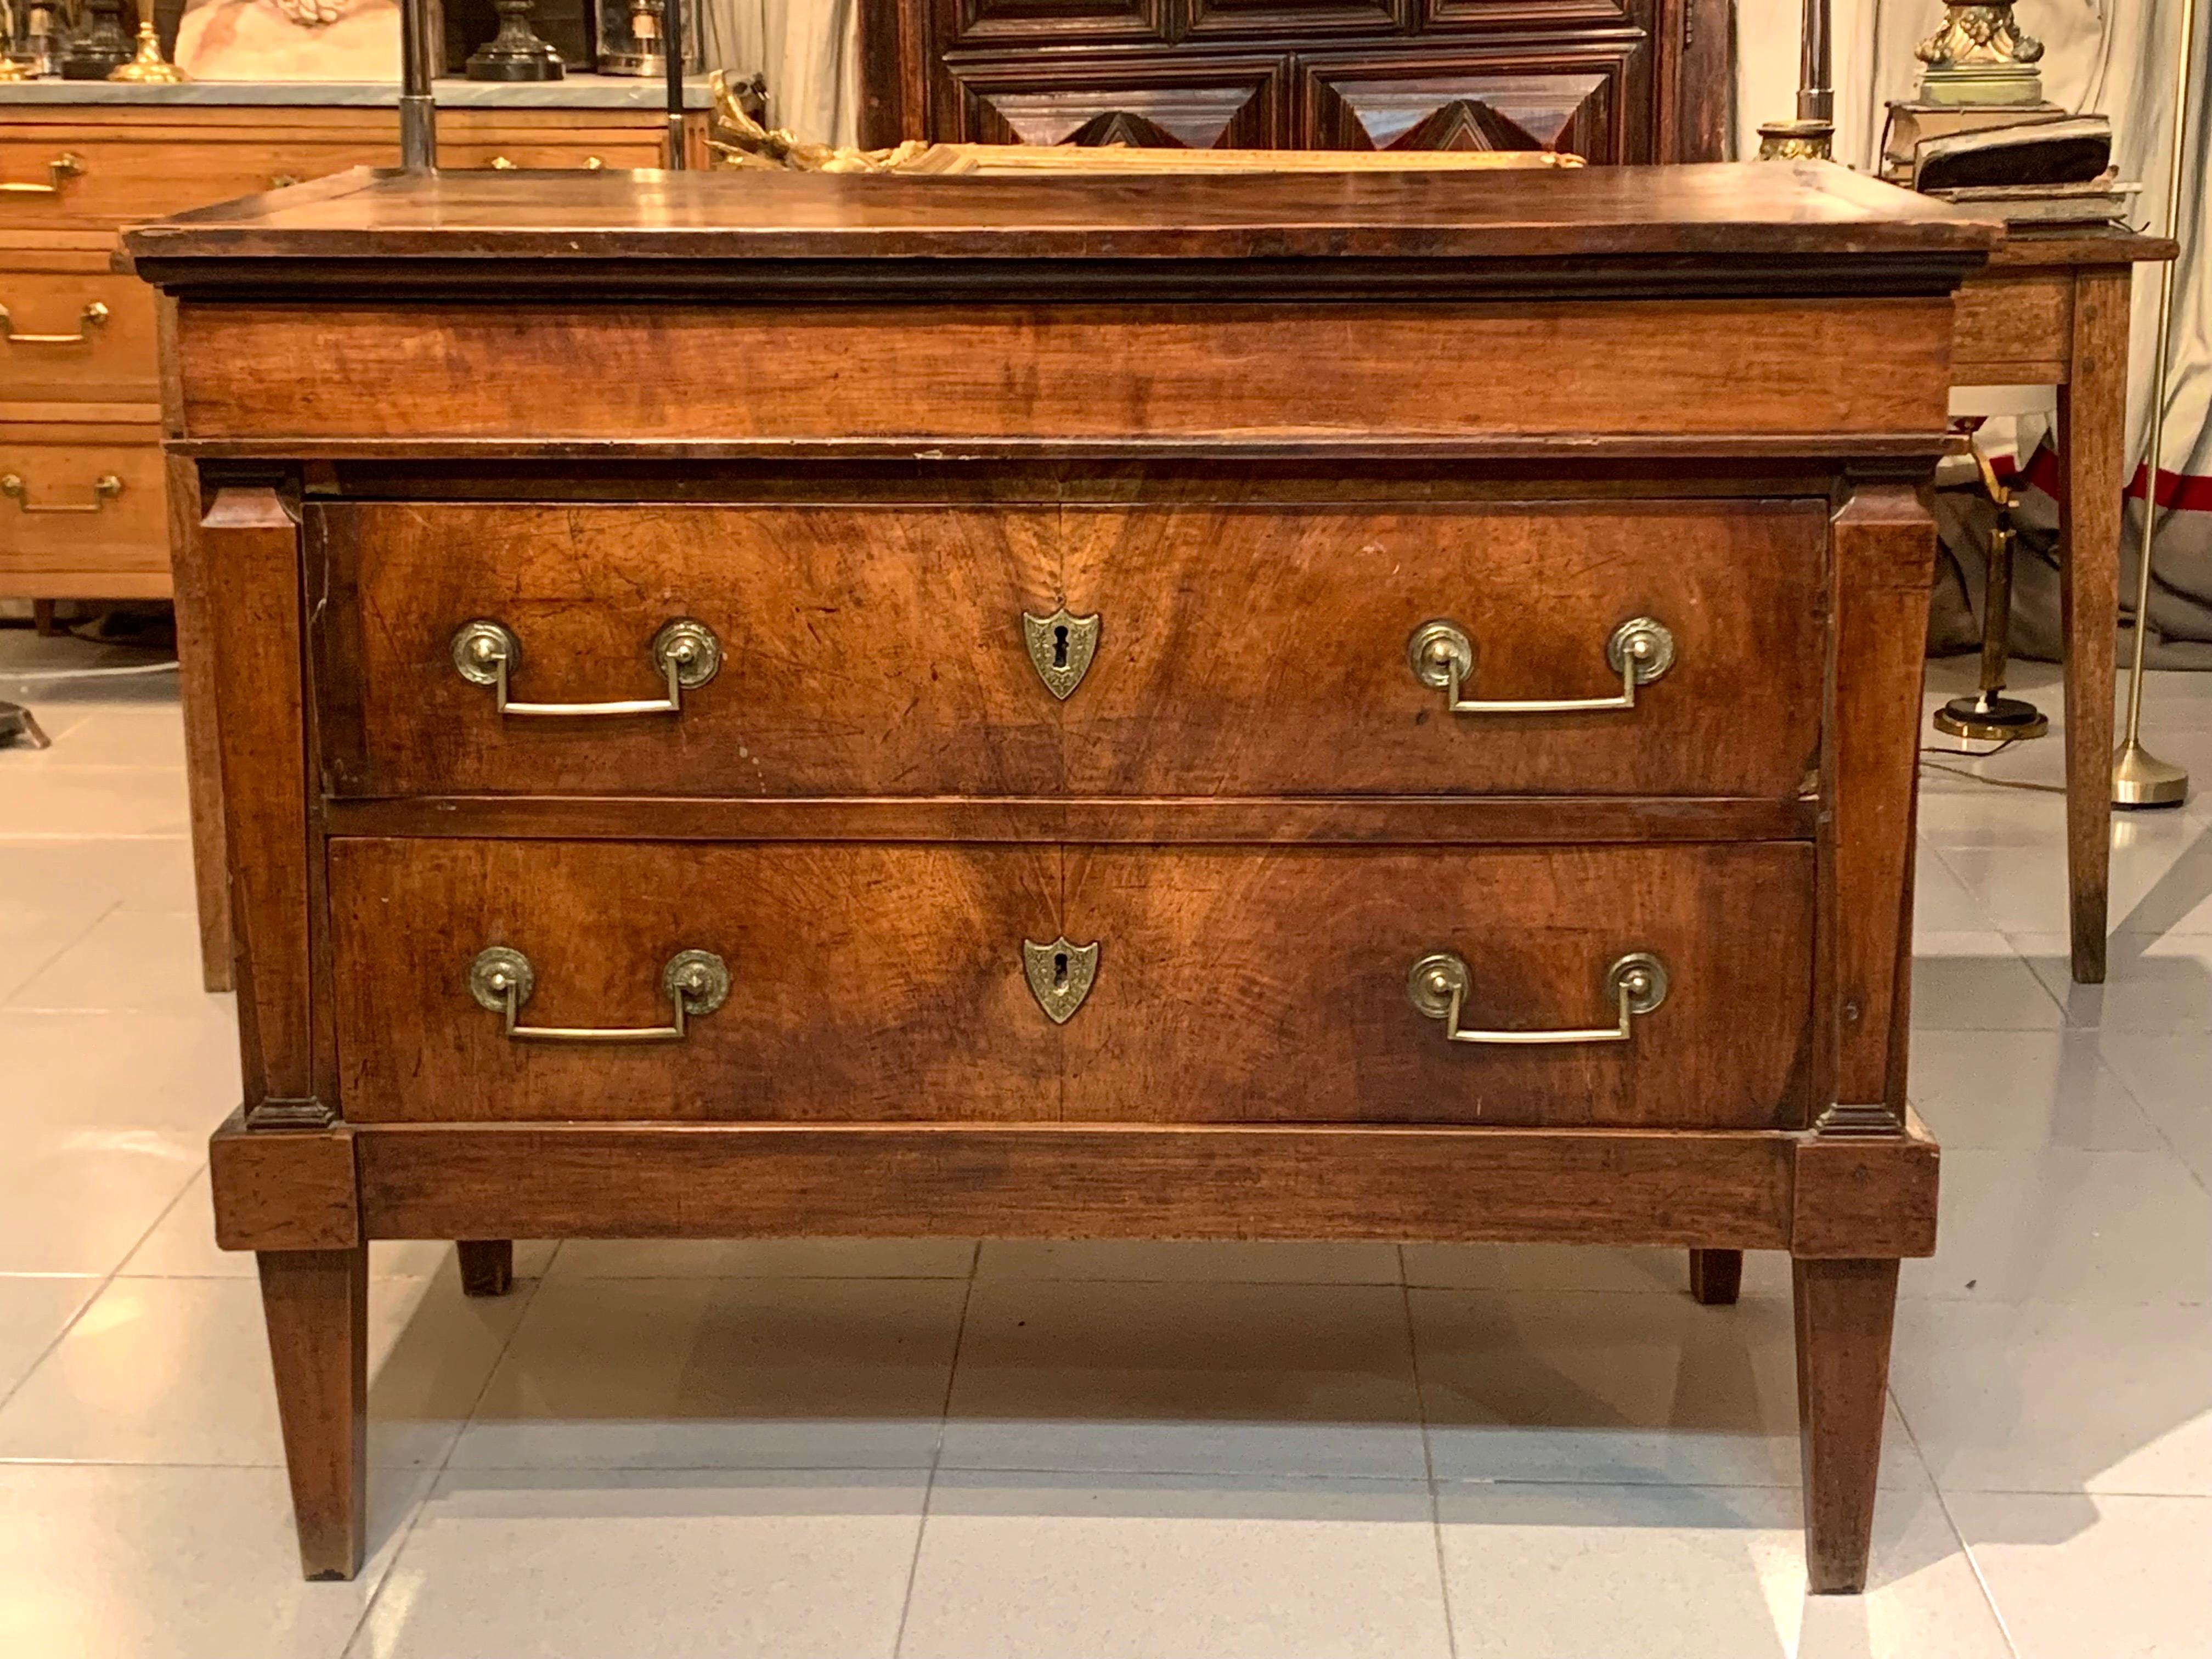 A rare French Empire period chest of drawers, in walnut wood with keyholes and gilded brass handles, the chest of drawers has two drawers and a top secret at the top, the sides are flanked by columns, the legs are stipite-shaped, the chest of